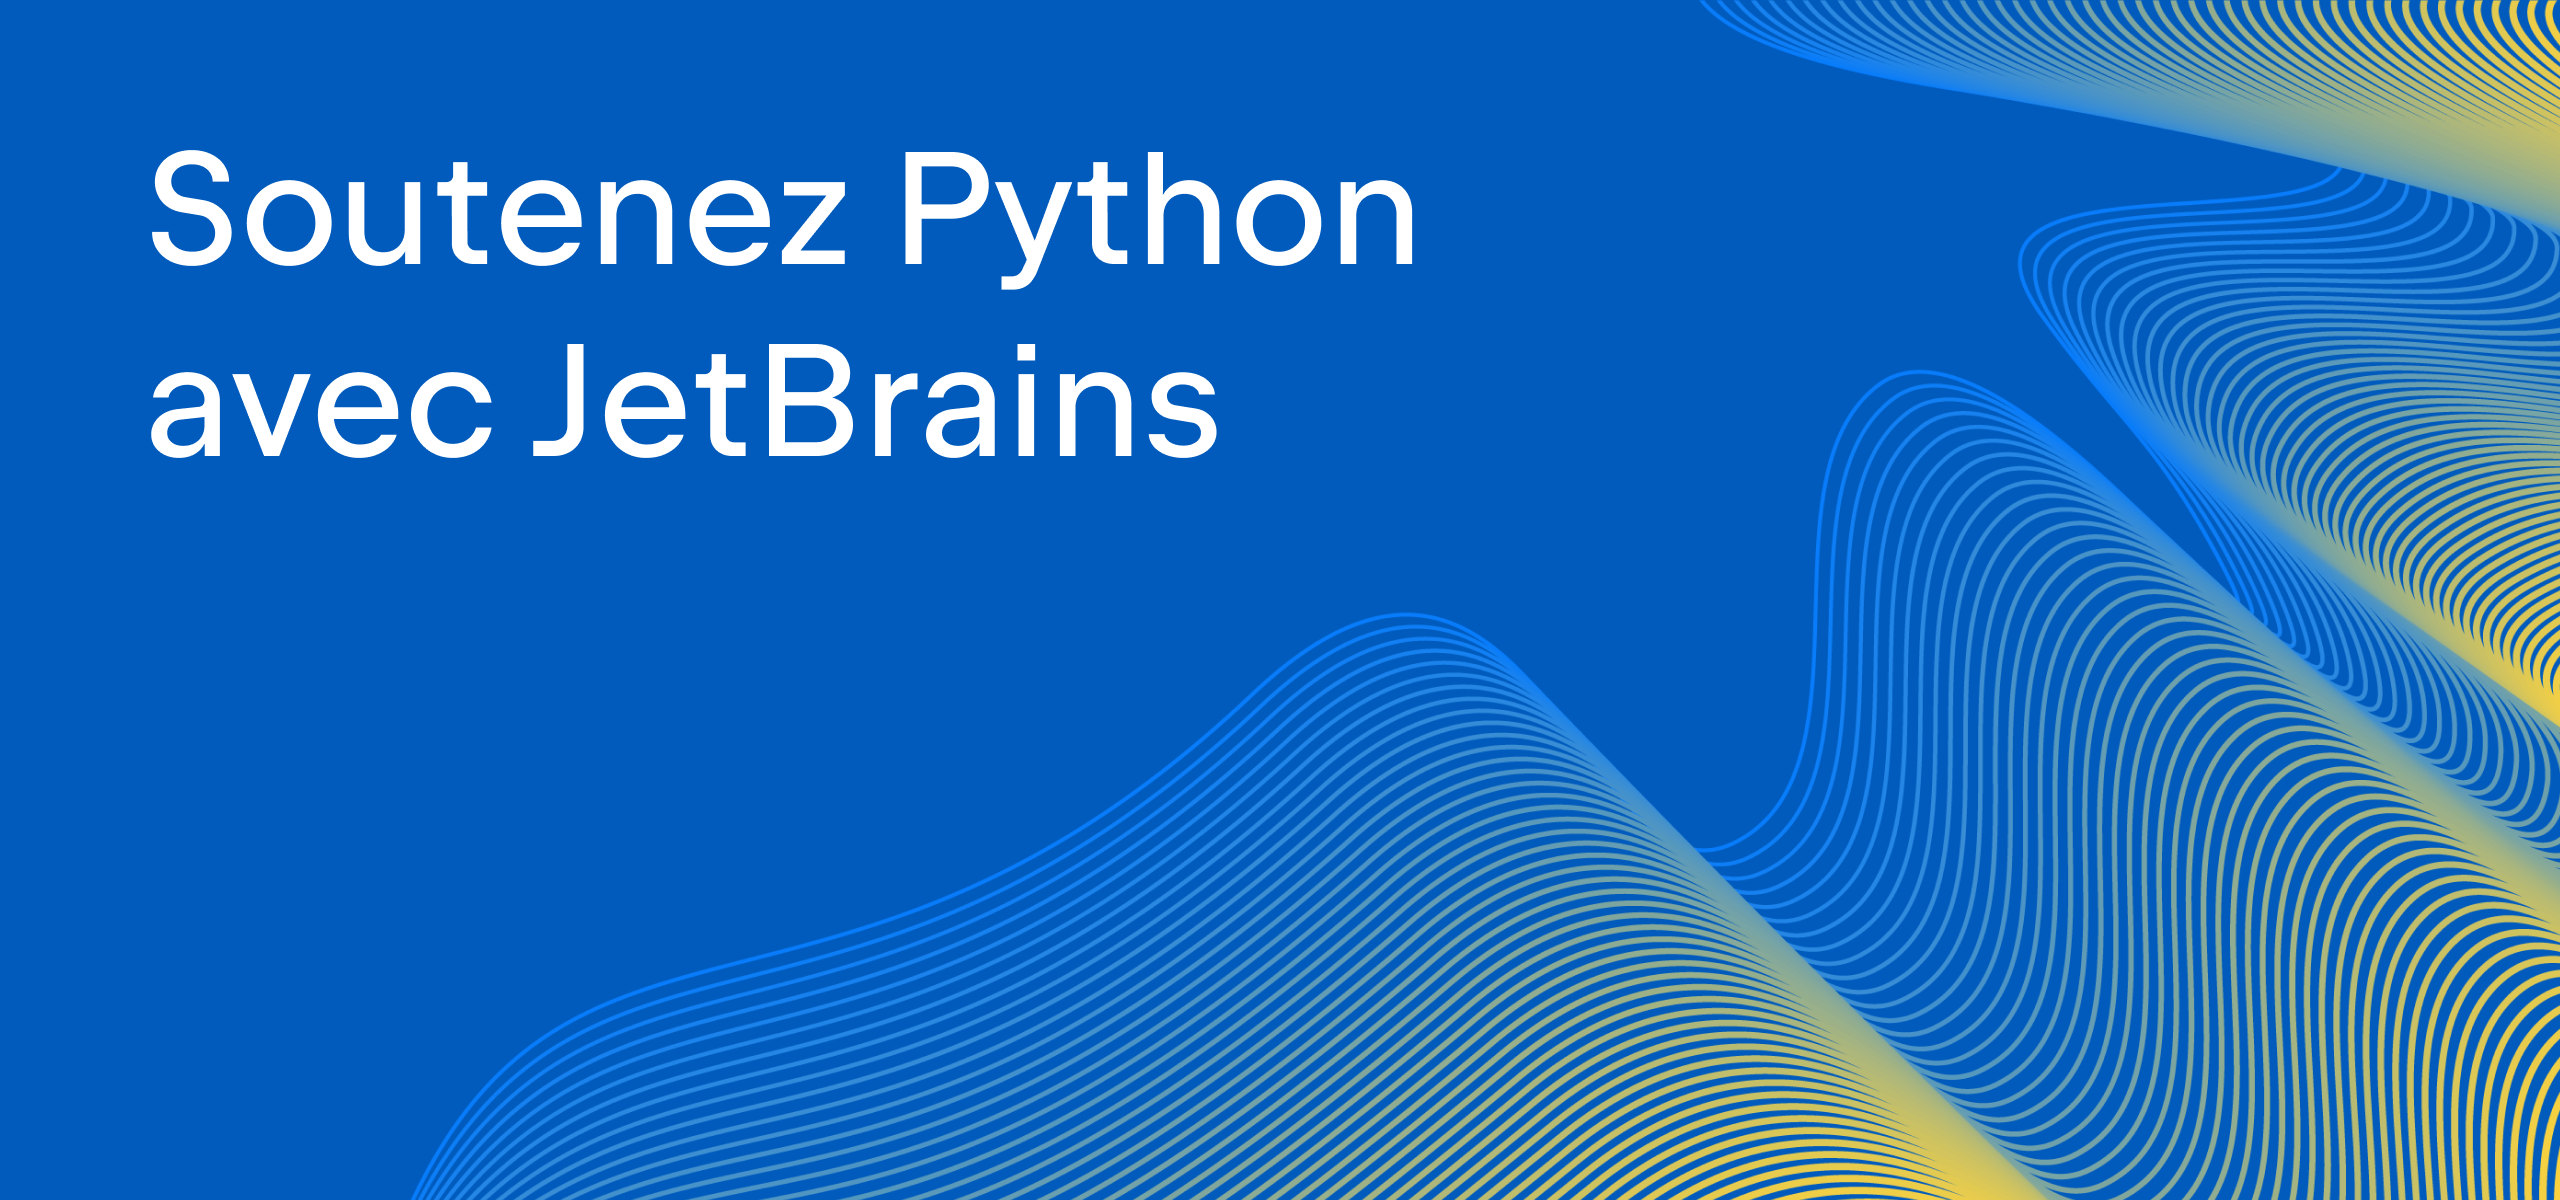 Nom : pythonjetbrains.png
Affichages : 99020
Taille : 1,21 Mo